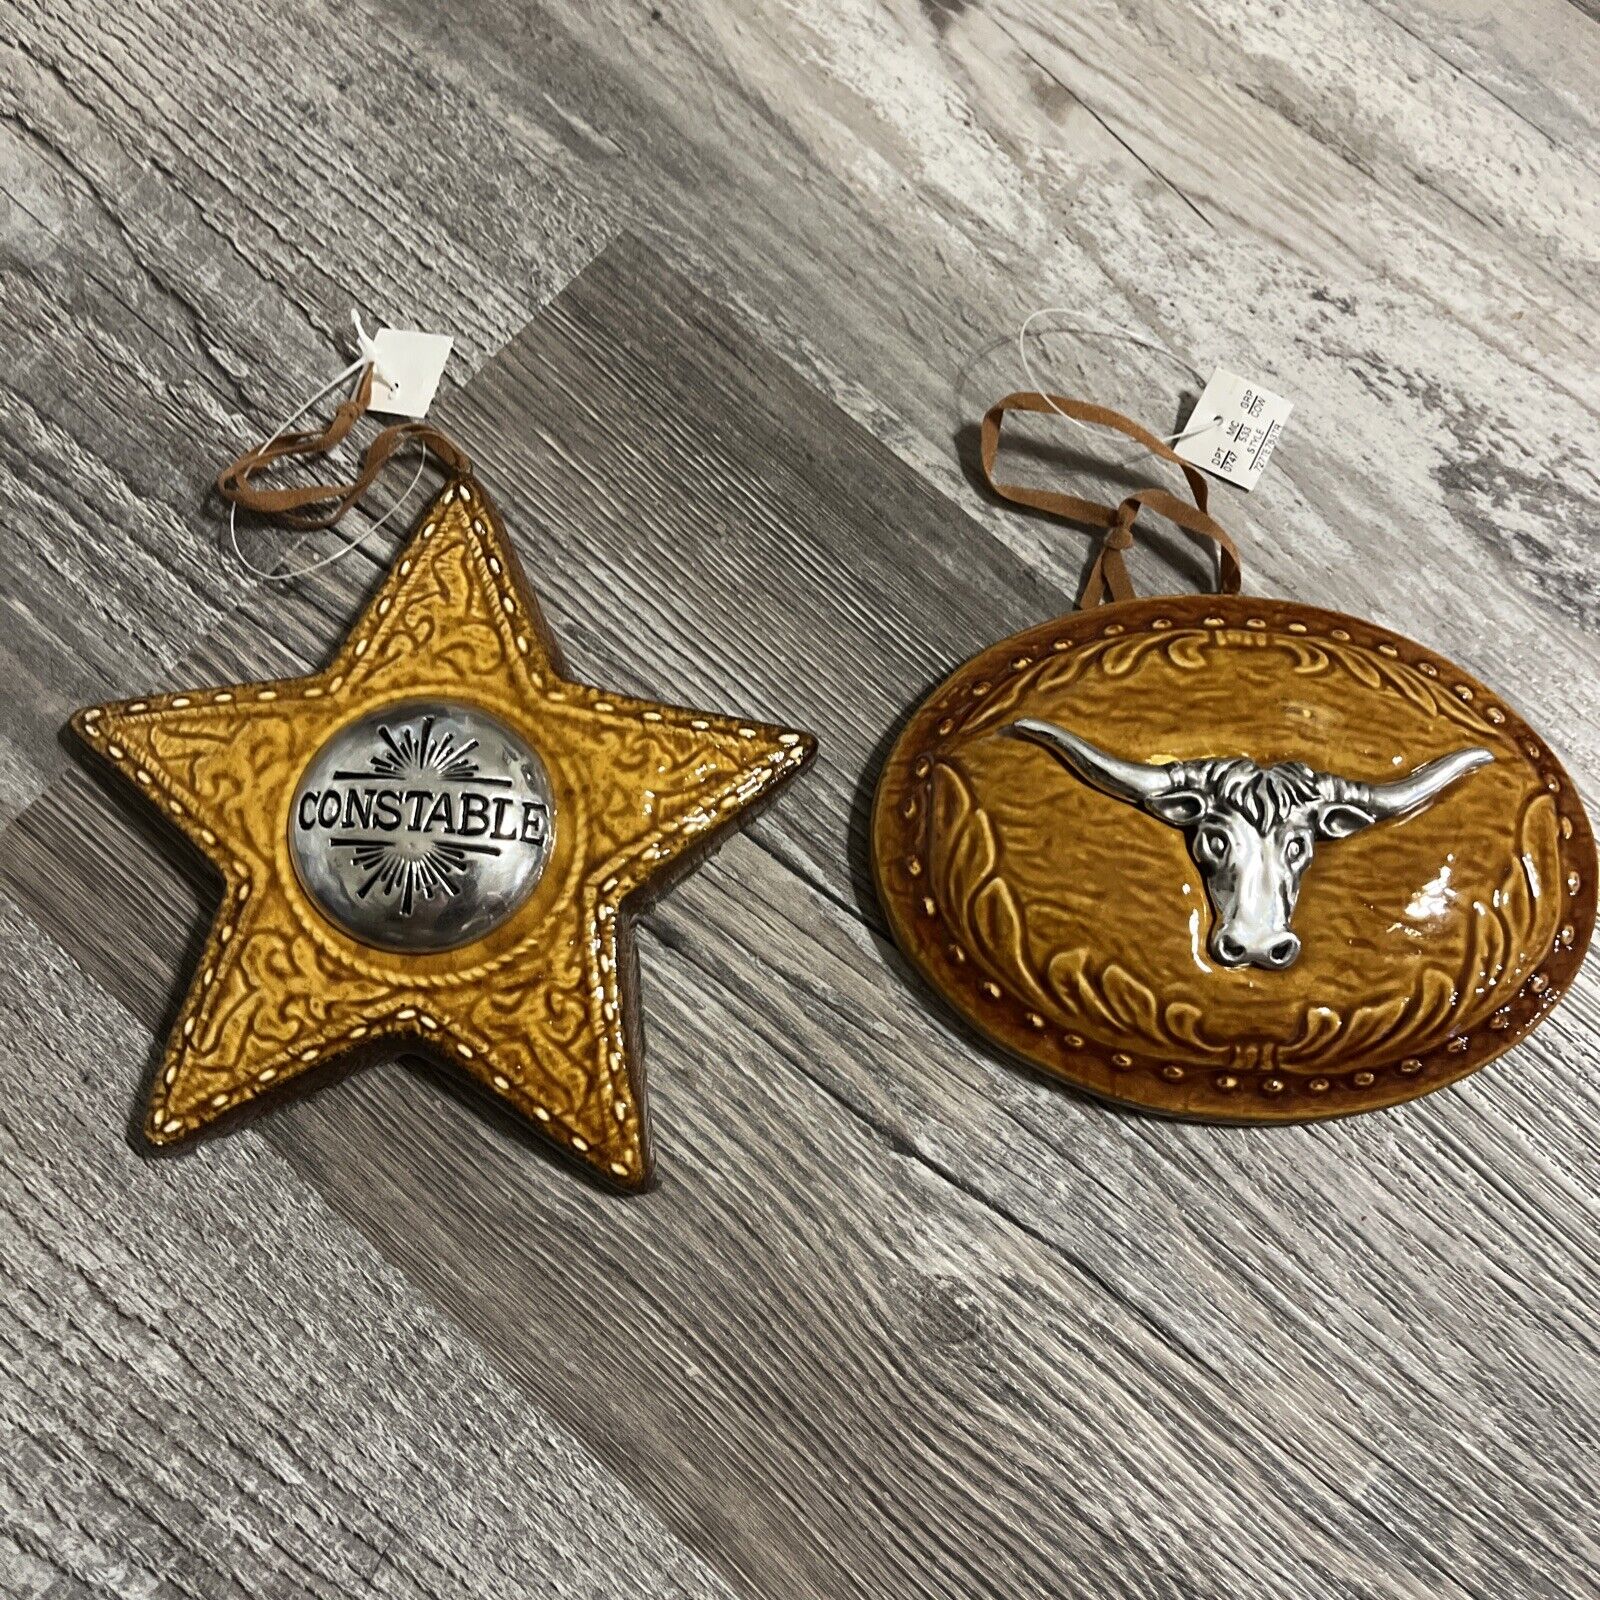 Dillards Trimmings Christmas Ornaments Set of 2 Western